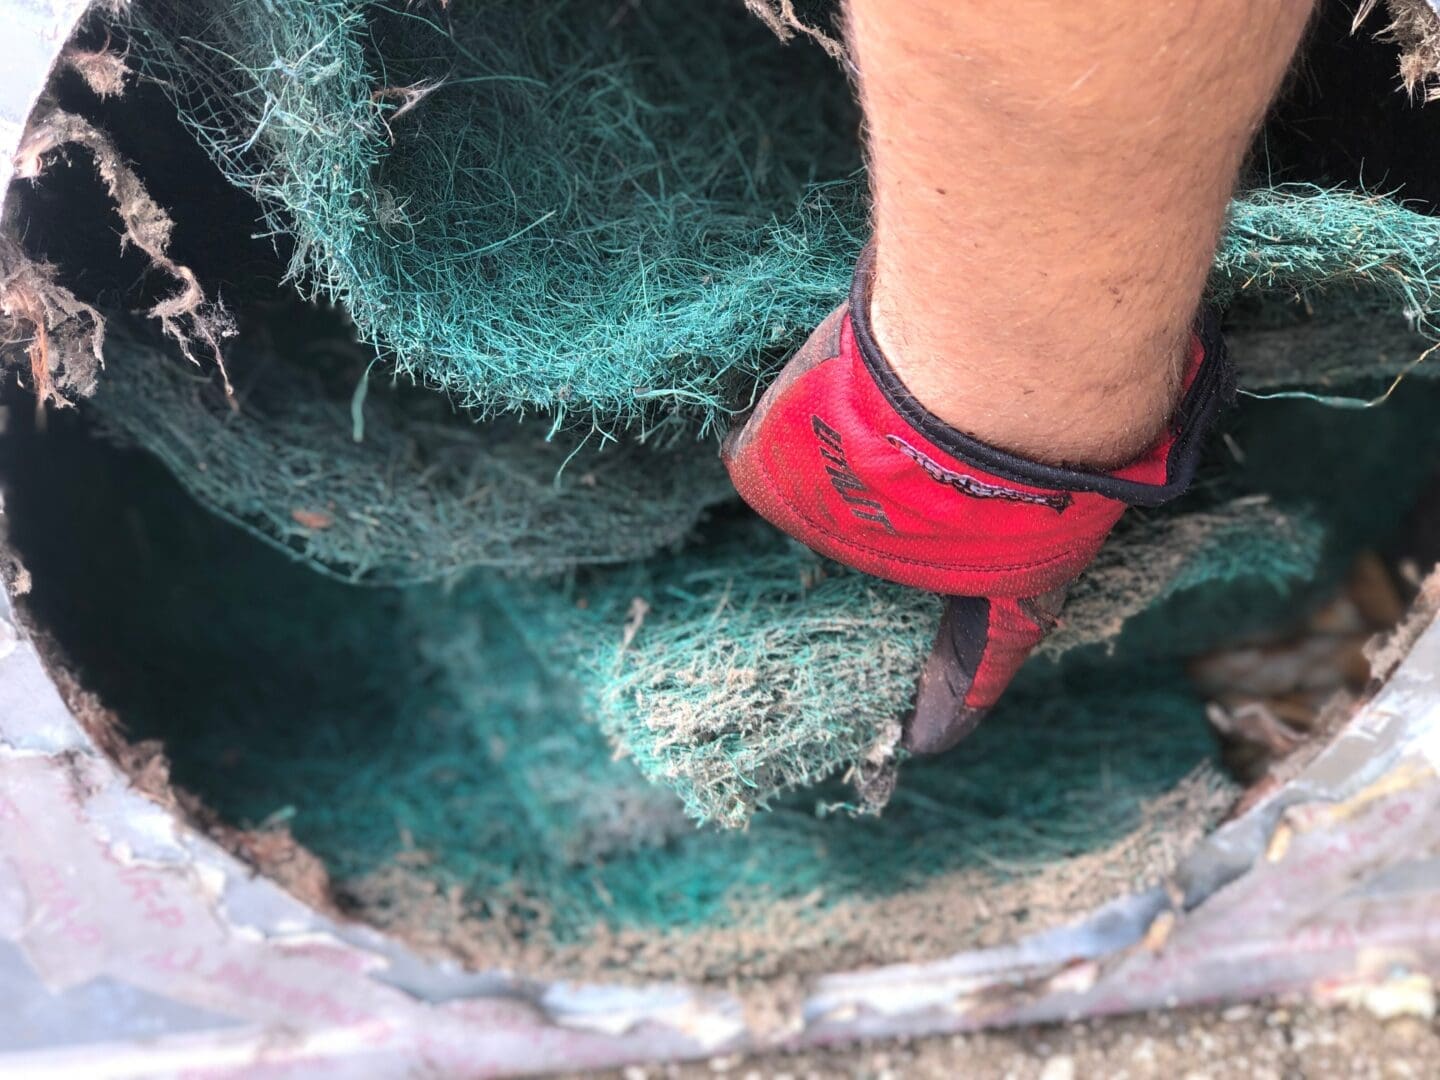 Close-up of a person's ankle with a red shoe stepping into a hole lined with green mesh and debris.